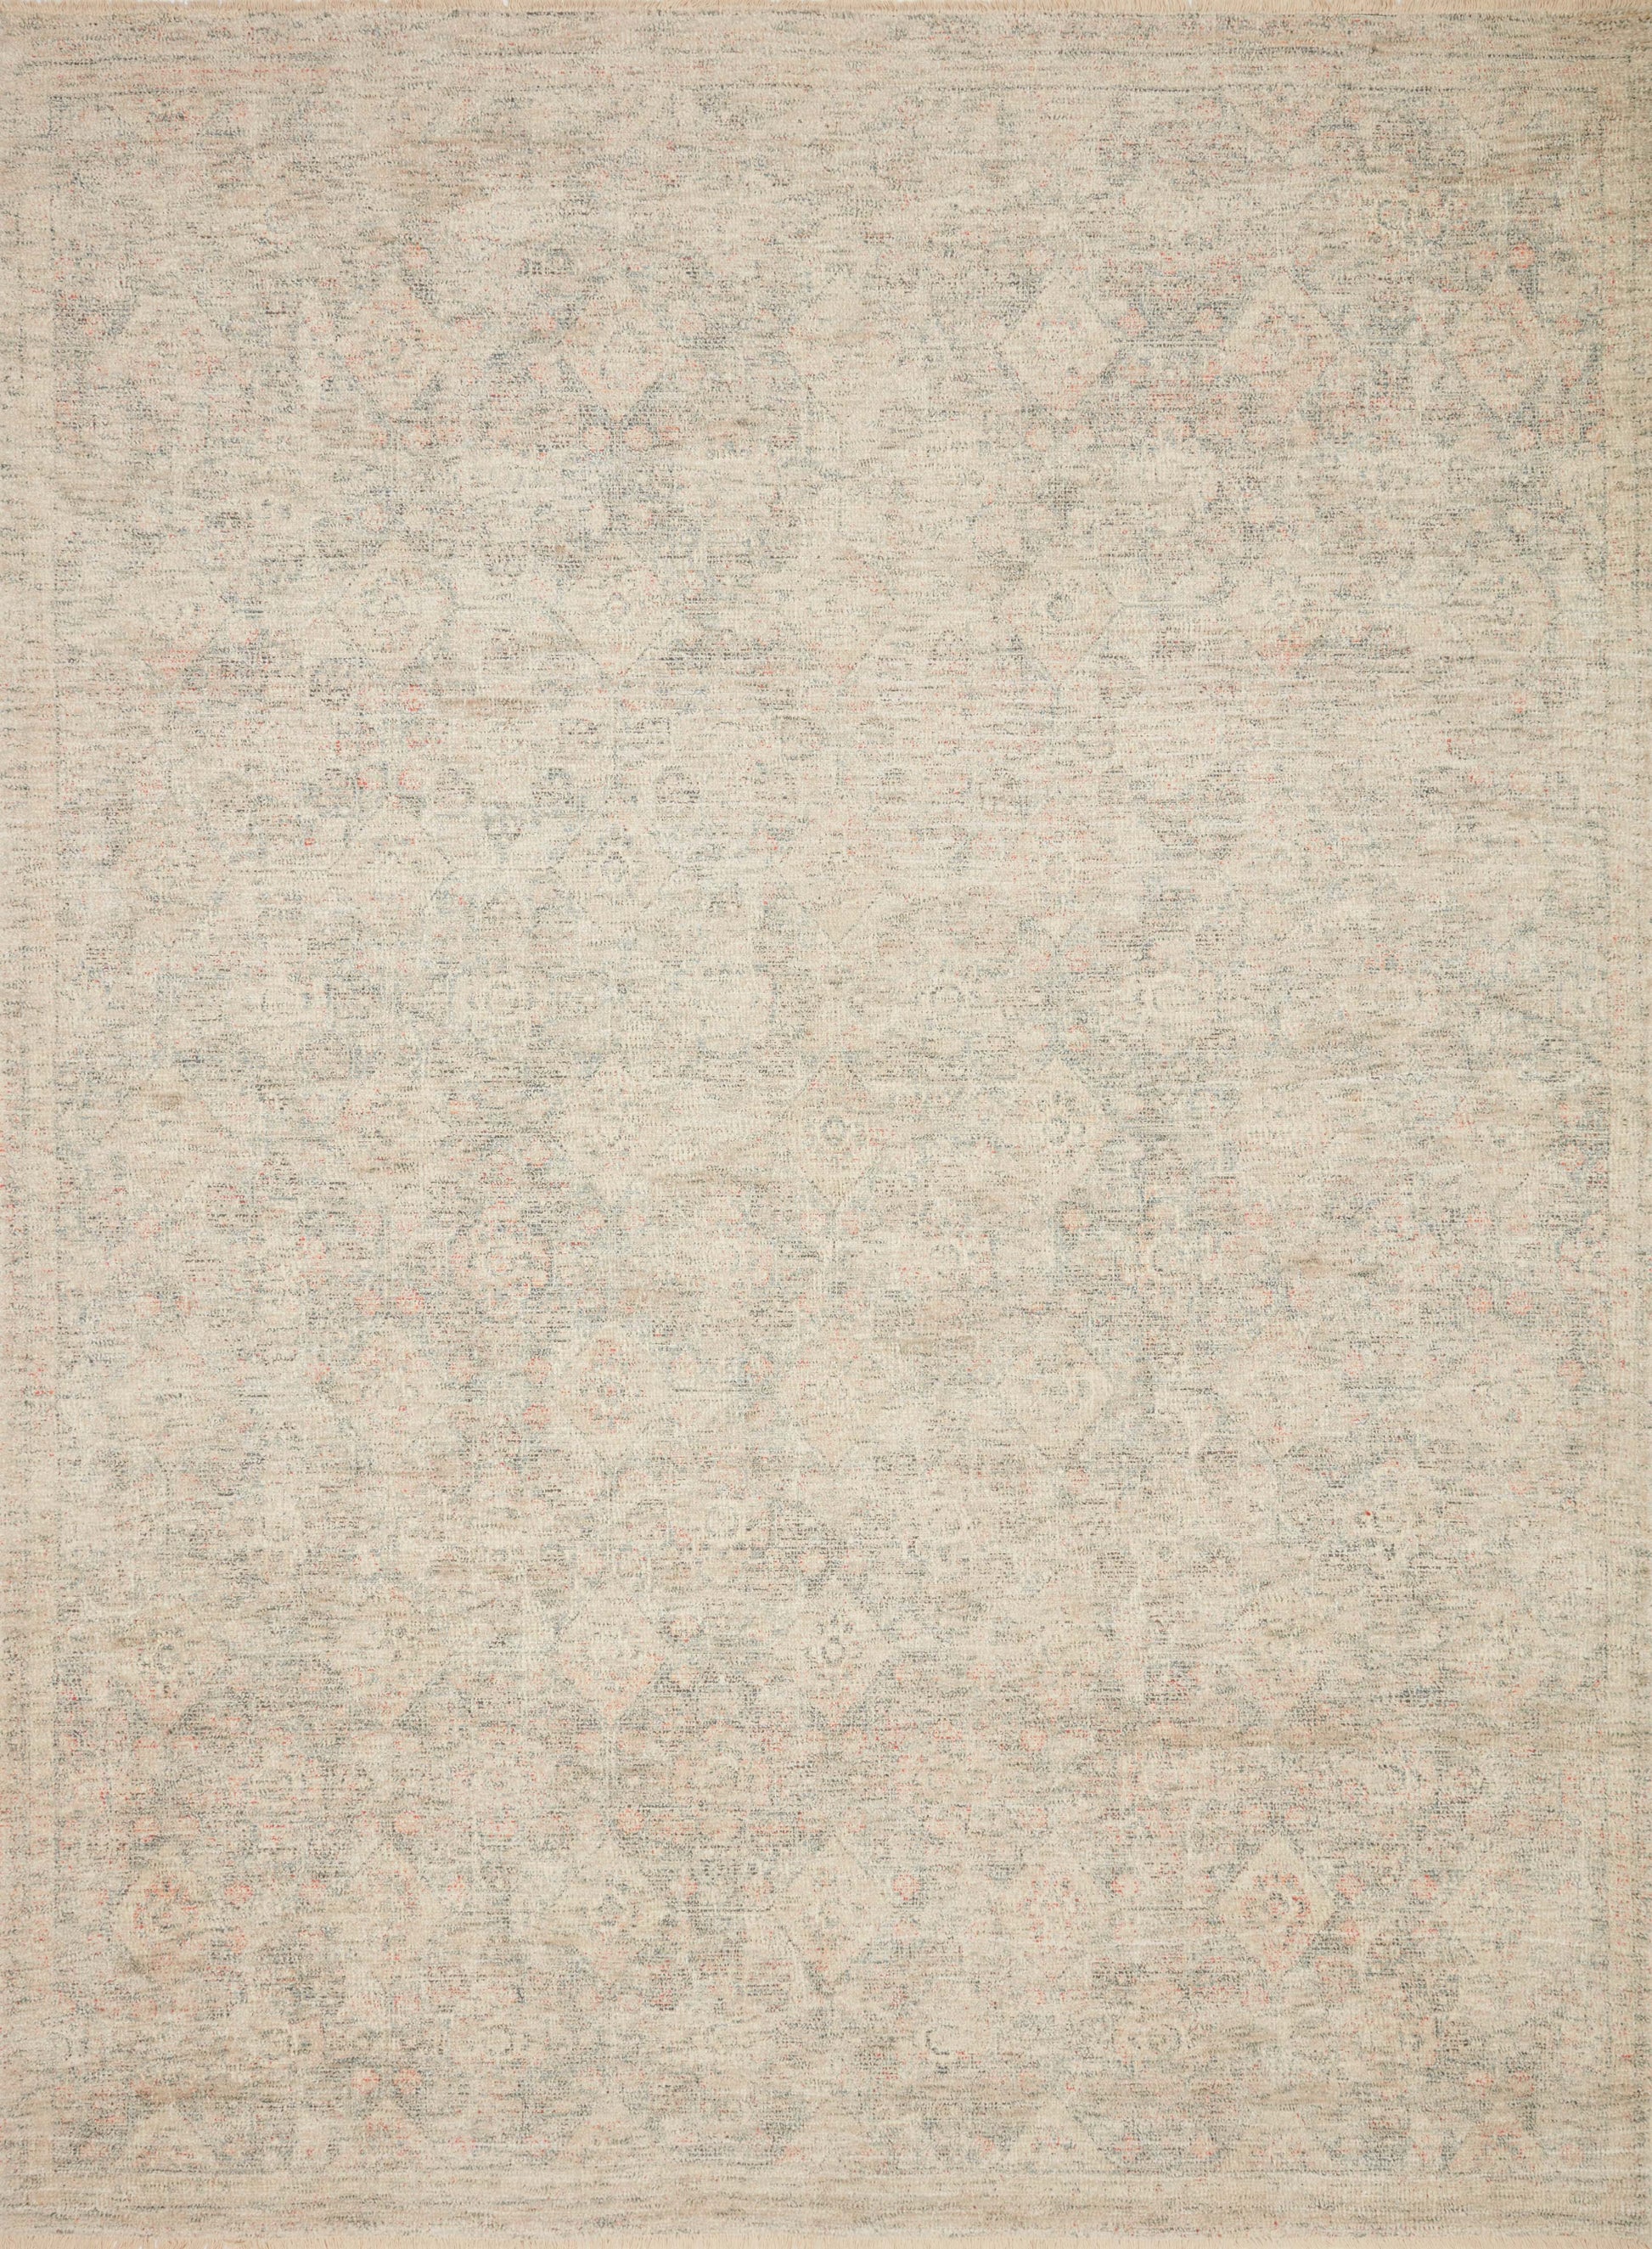 A picture of Loloi's Priya rug, in style PRY-02, color Navy / Ivory